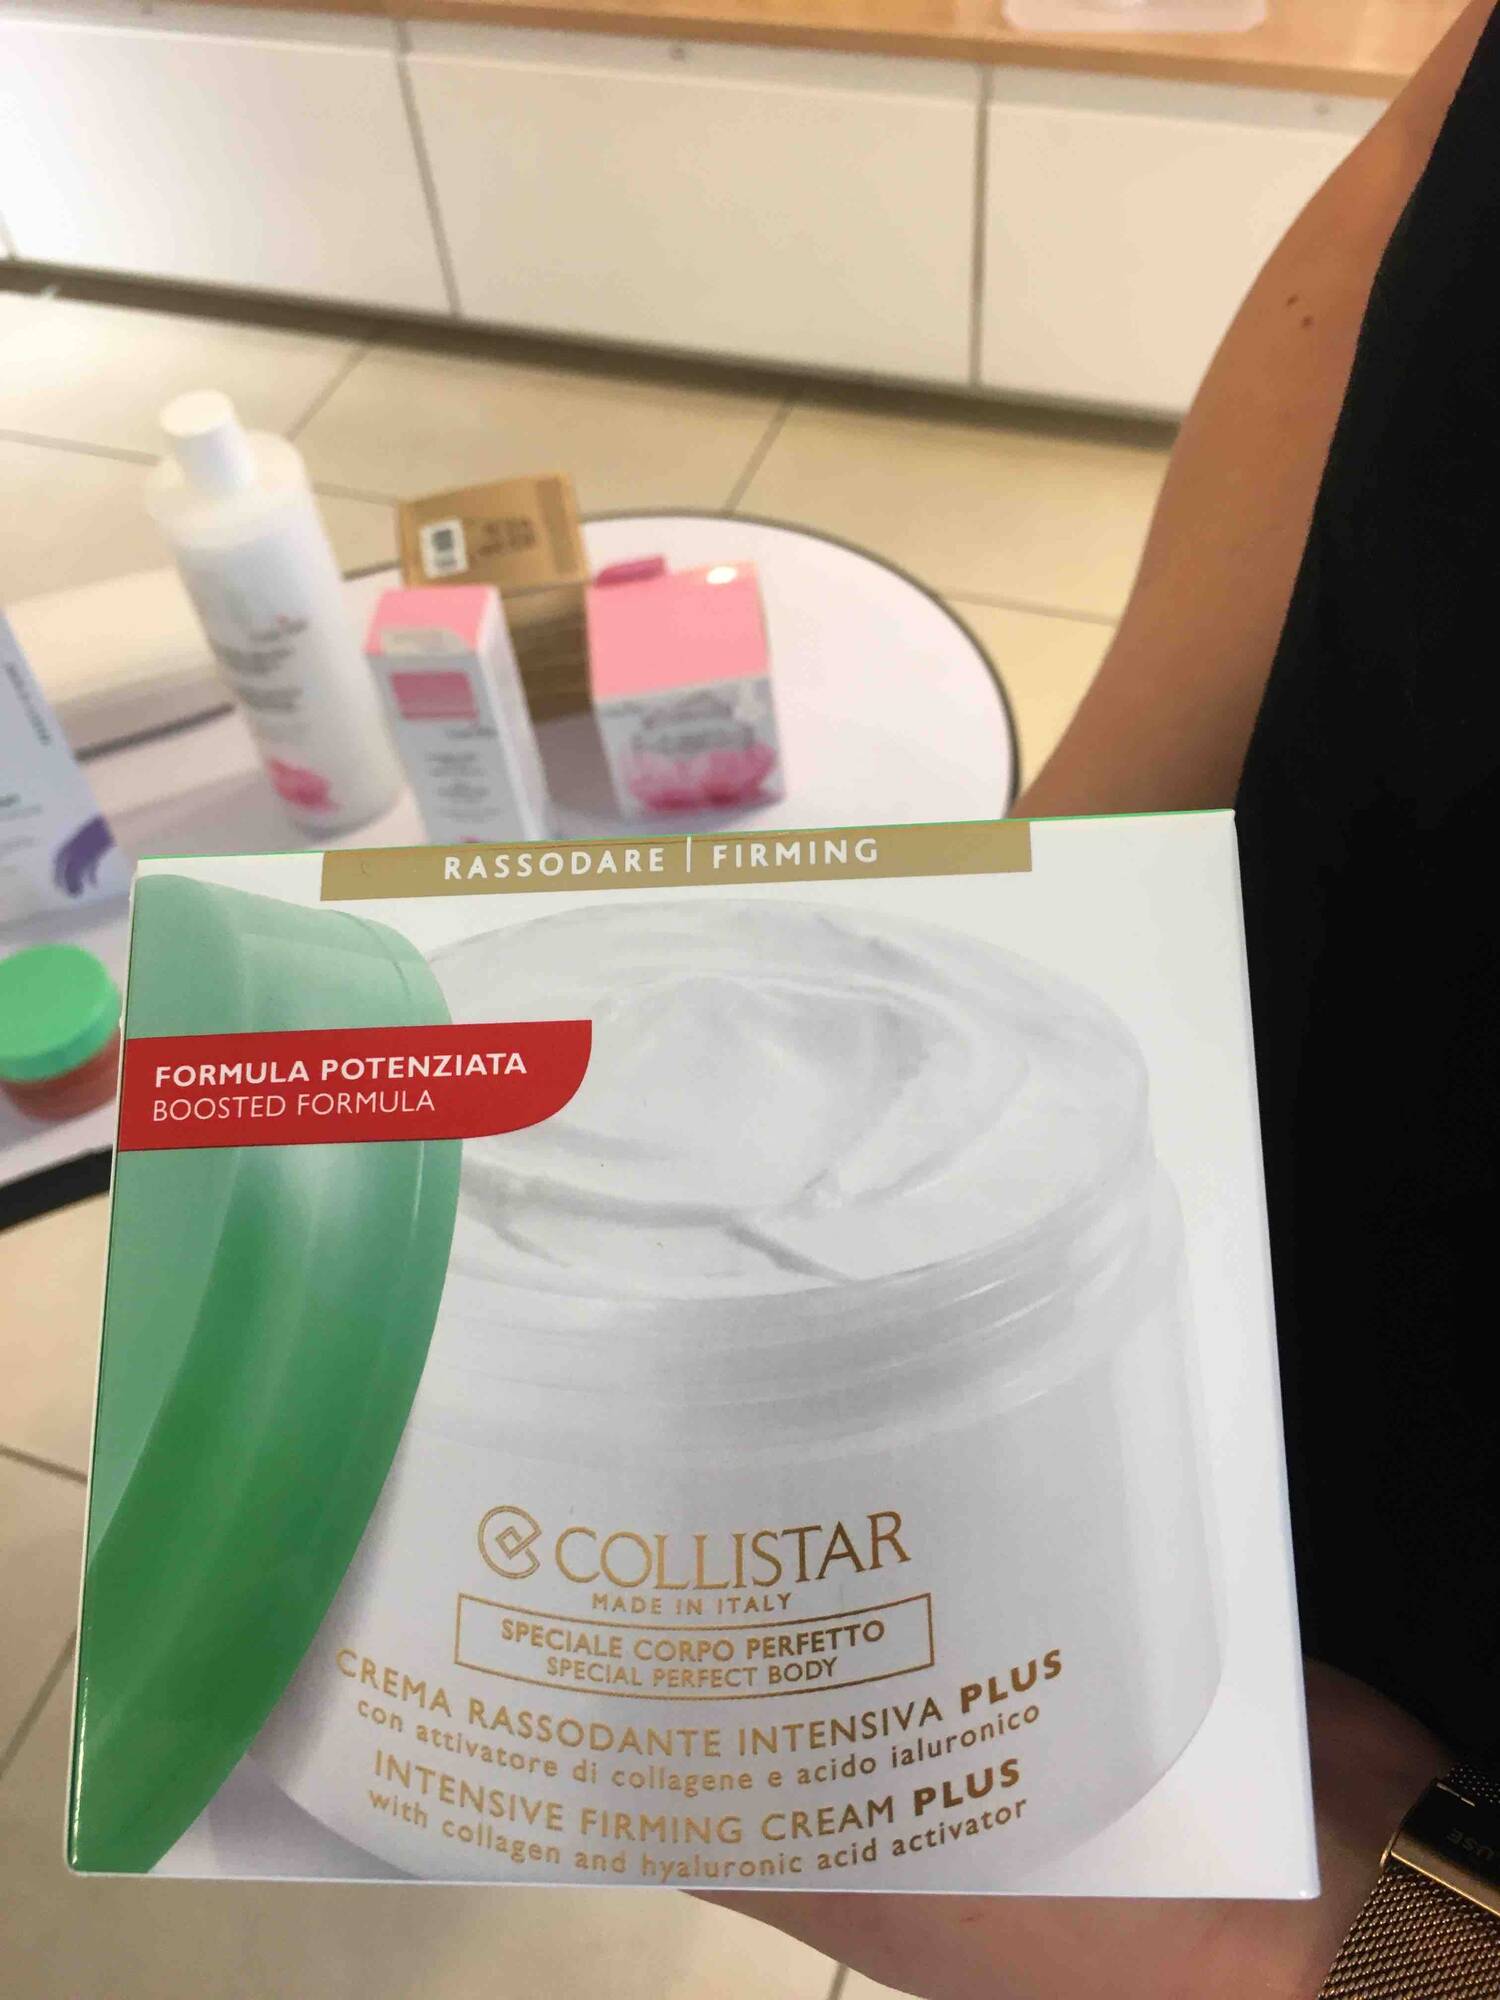 COLLISTAR - Special perfect body - Intensive firming cream plus